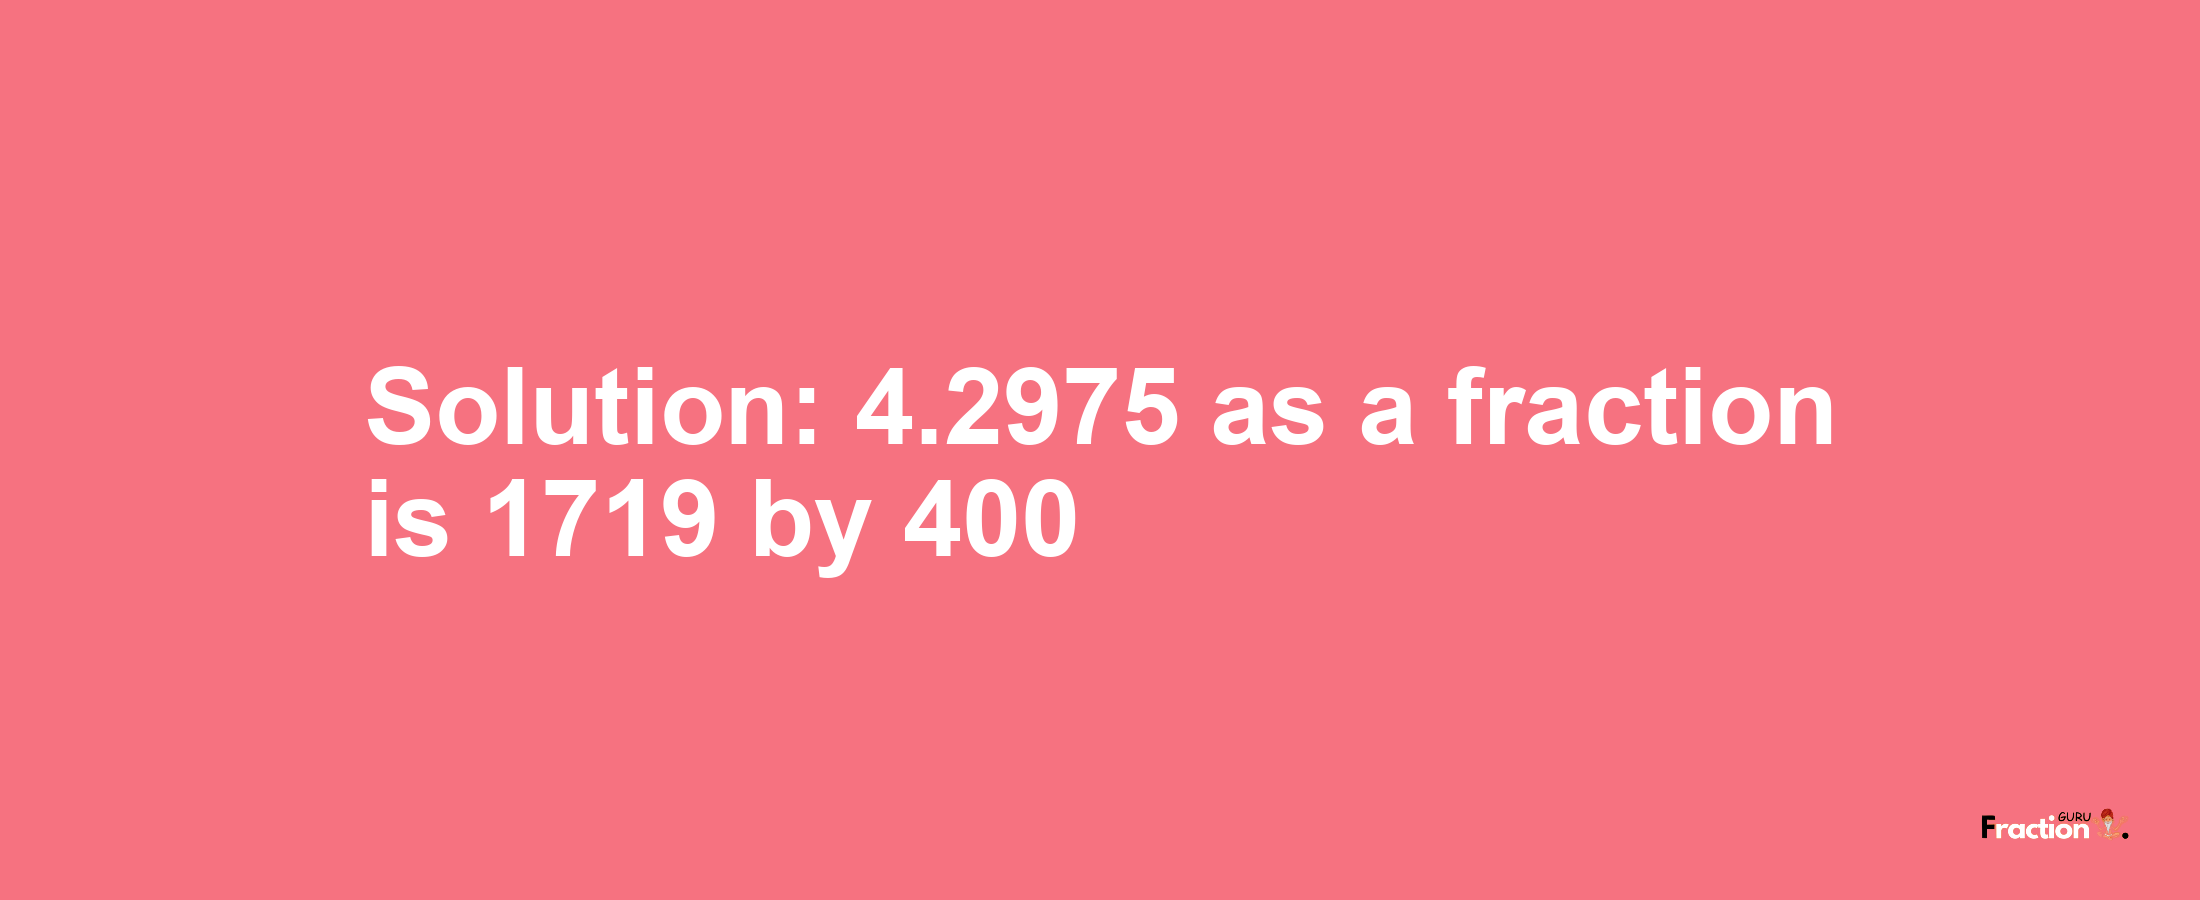 Solution:4.2975 as a fraction is 1719/400